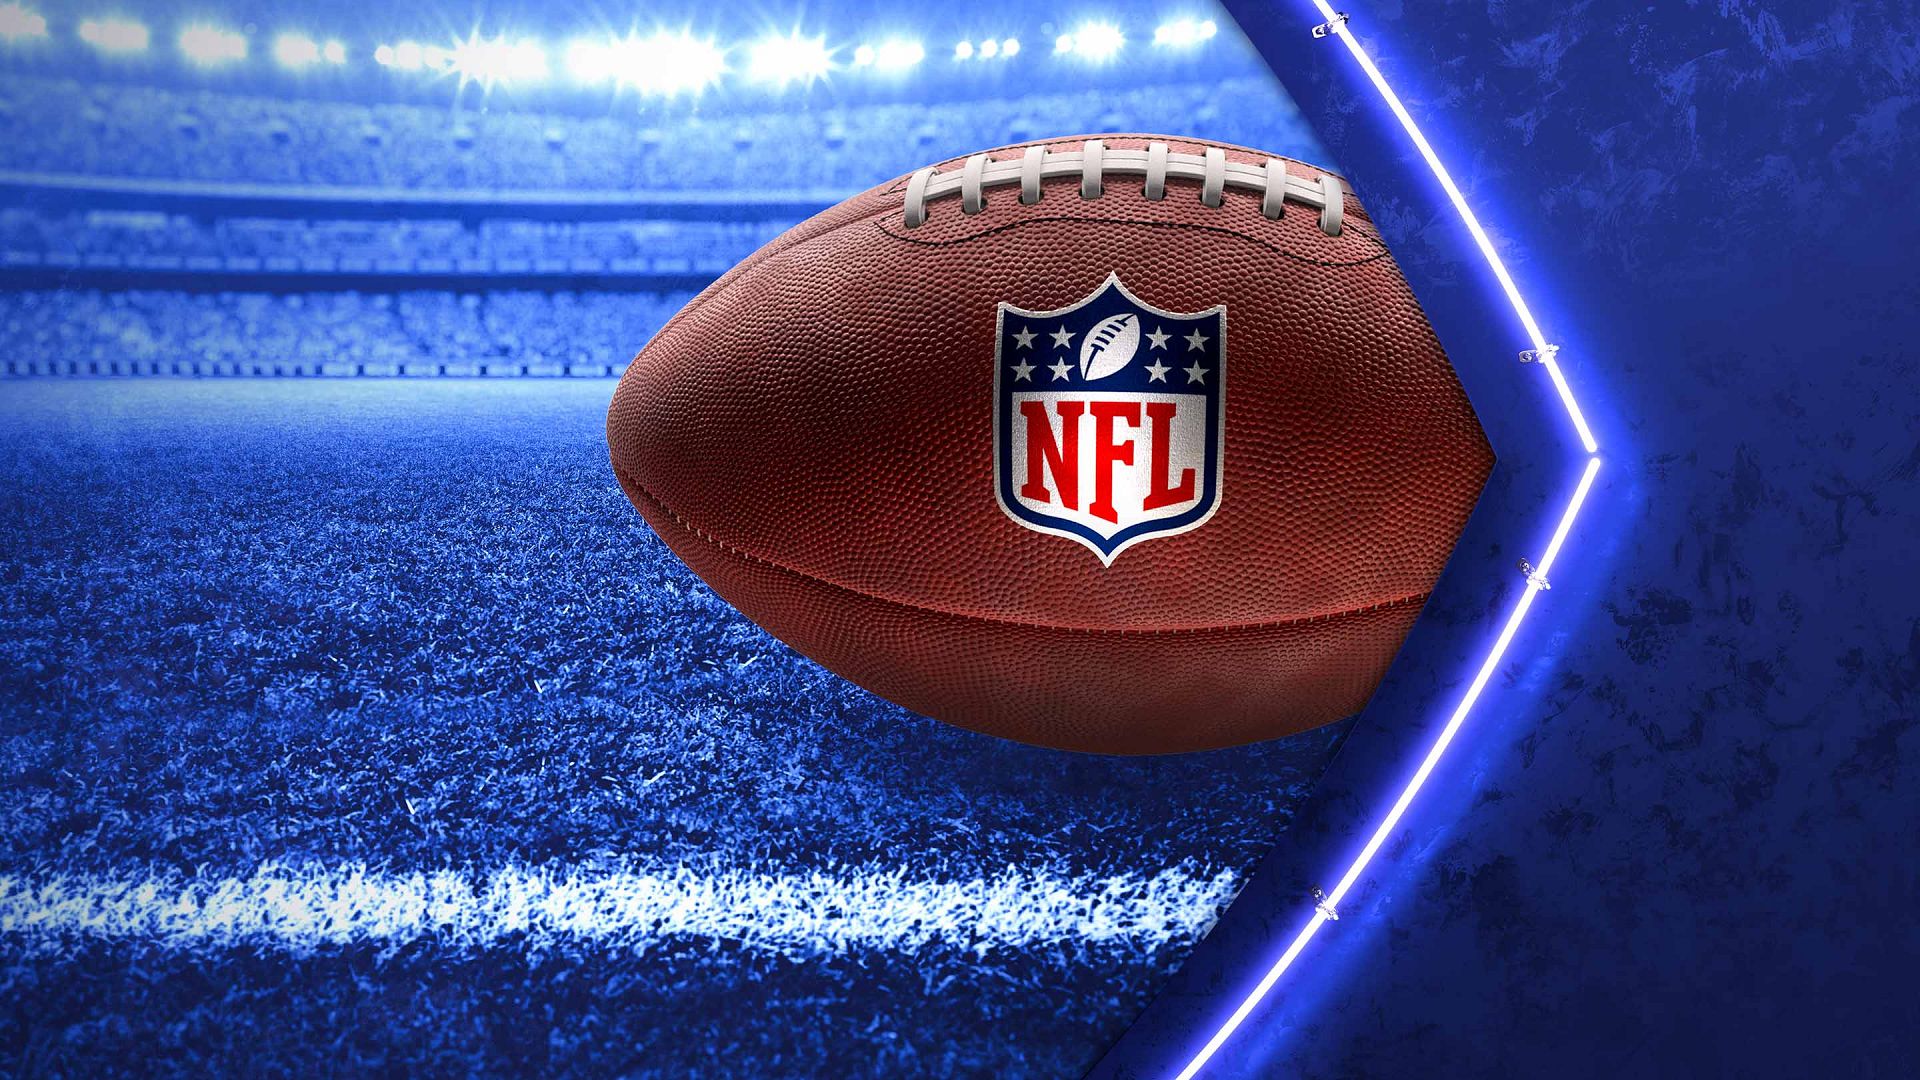 NFL Games live stream: Where to stream NFL live online from anywhere